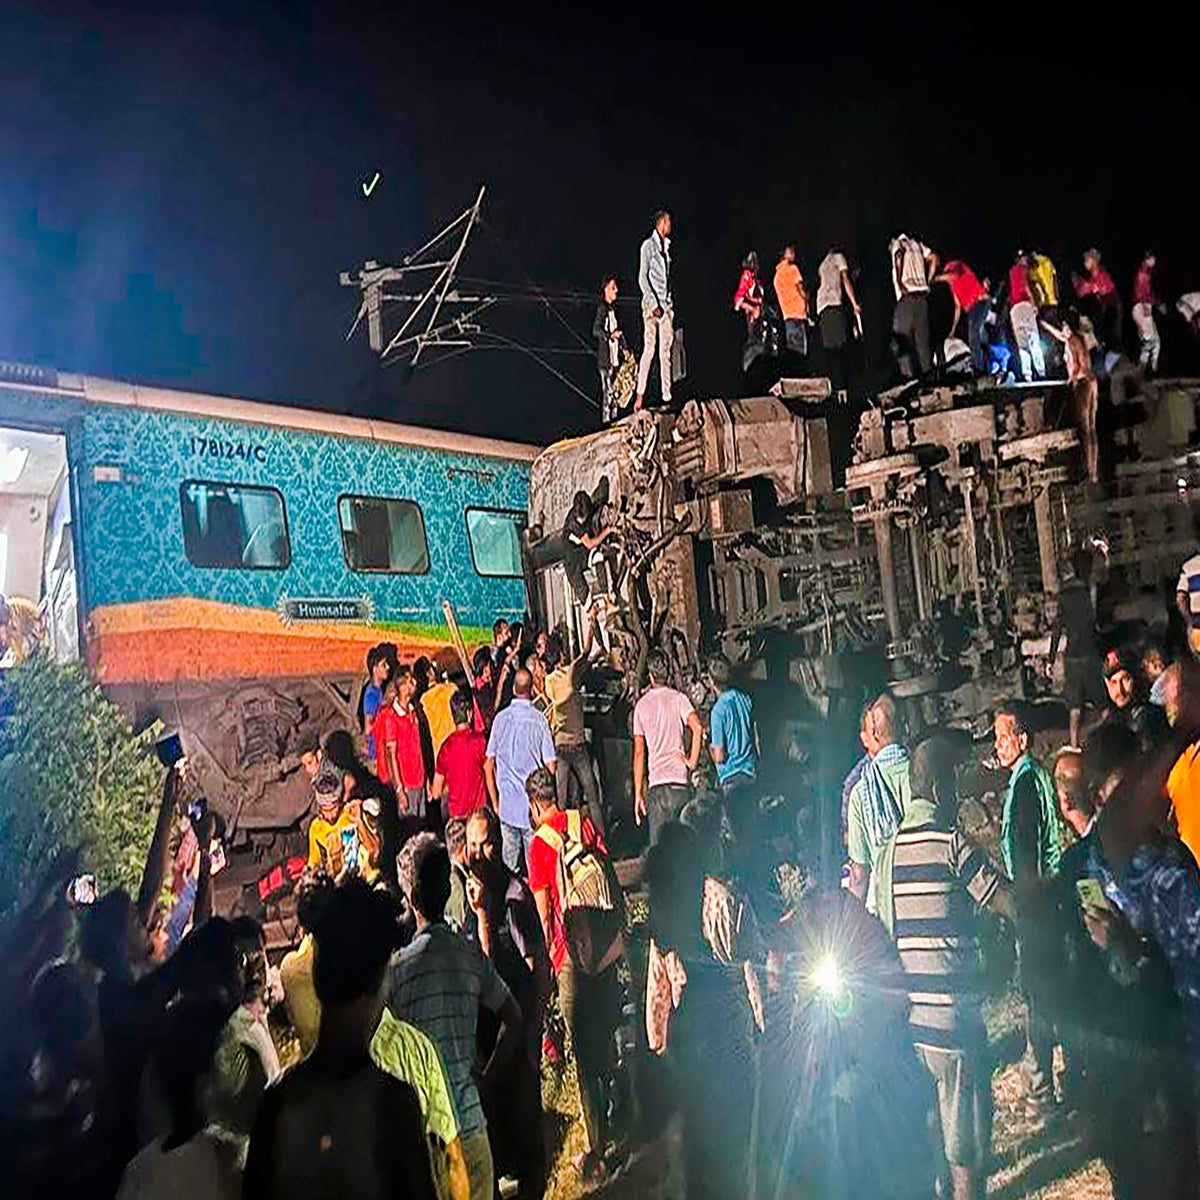 Deadly Indian rail crash shifts focus from new trains to safety